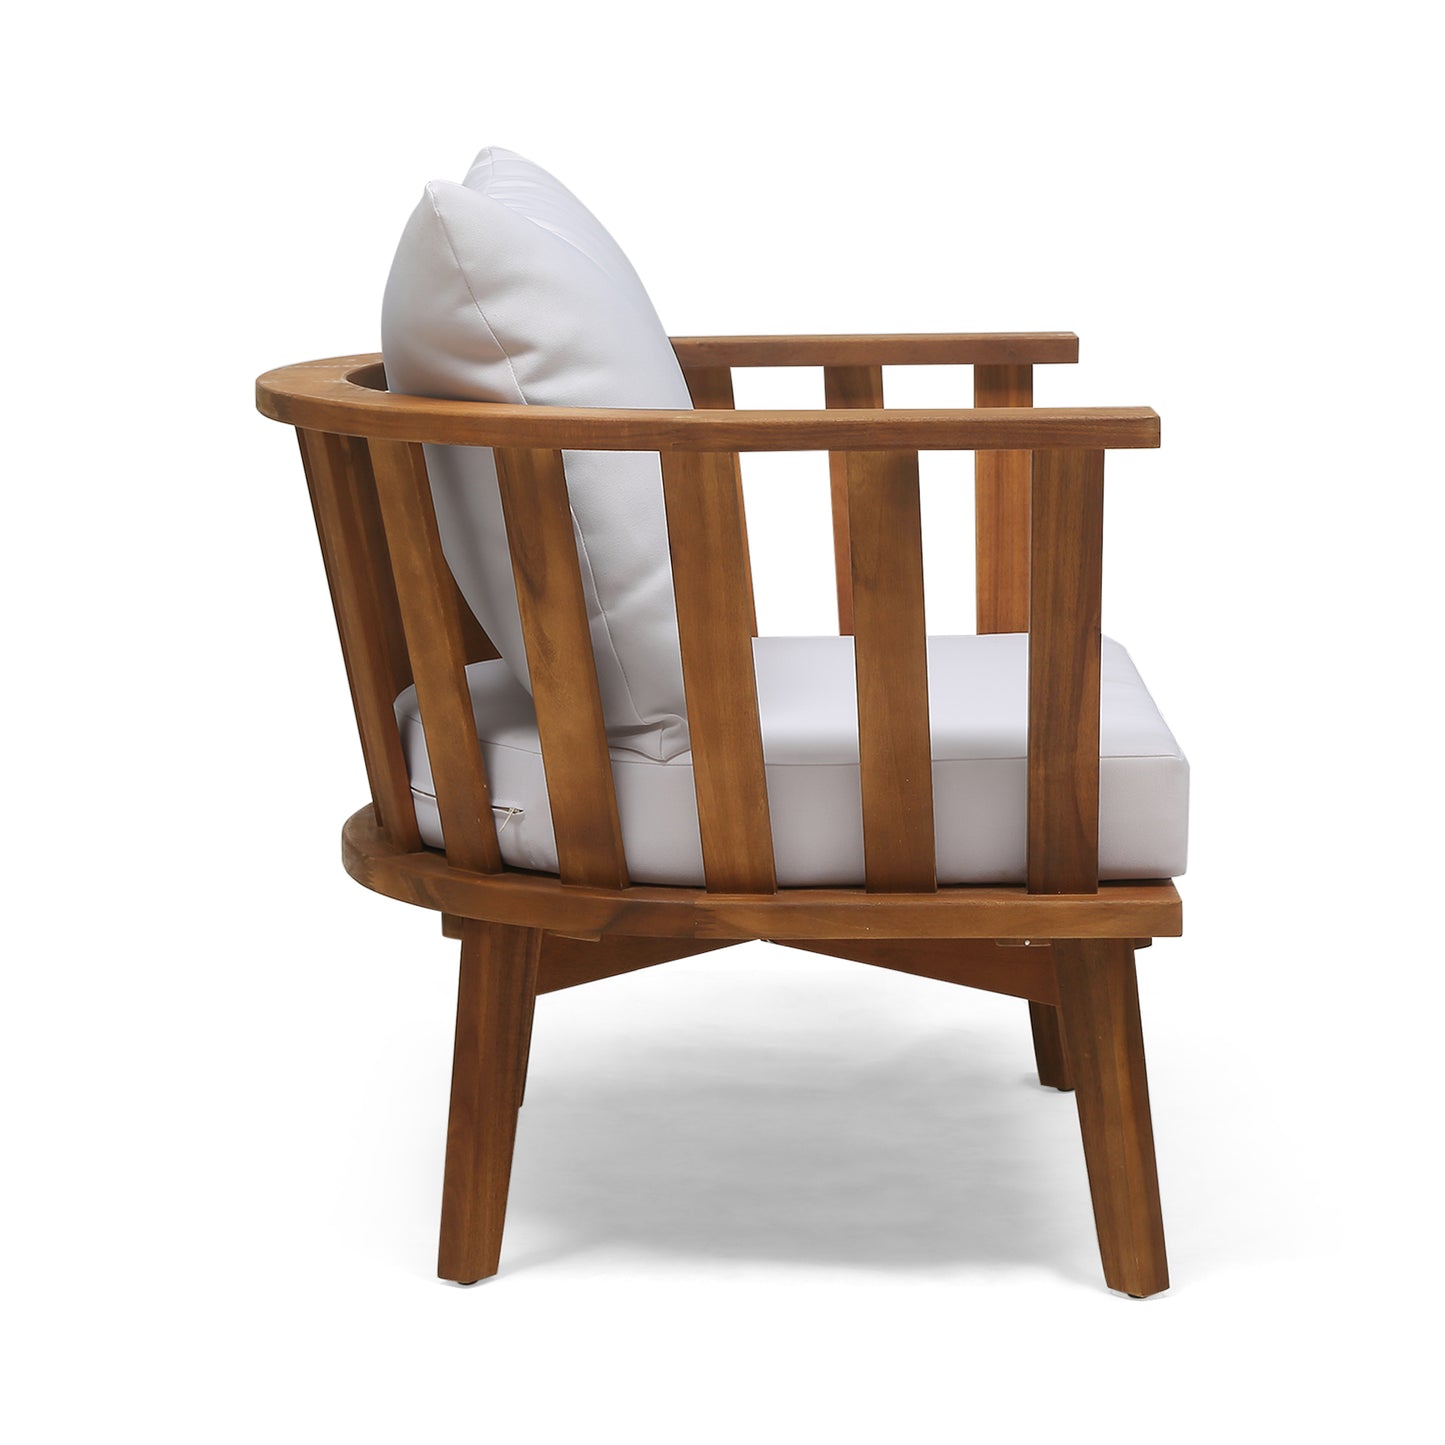 Dean Outdoor Wooden Club Chair with Cushions, White and Teak Finish